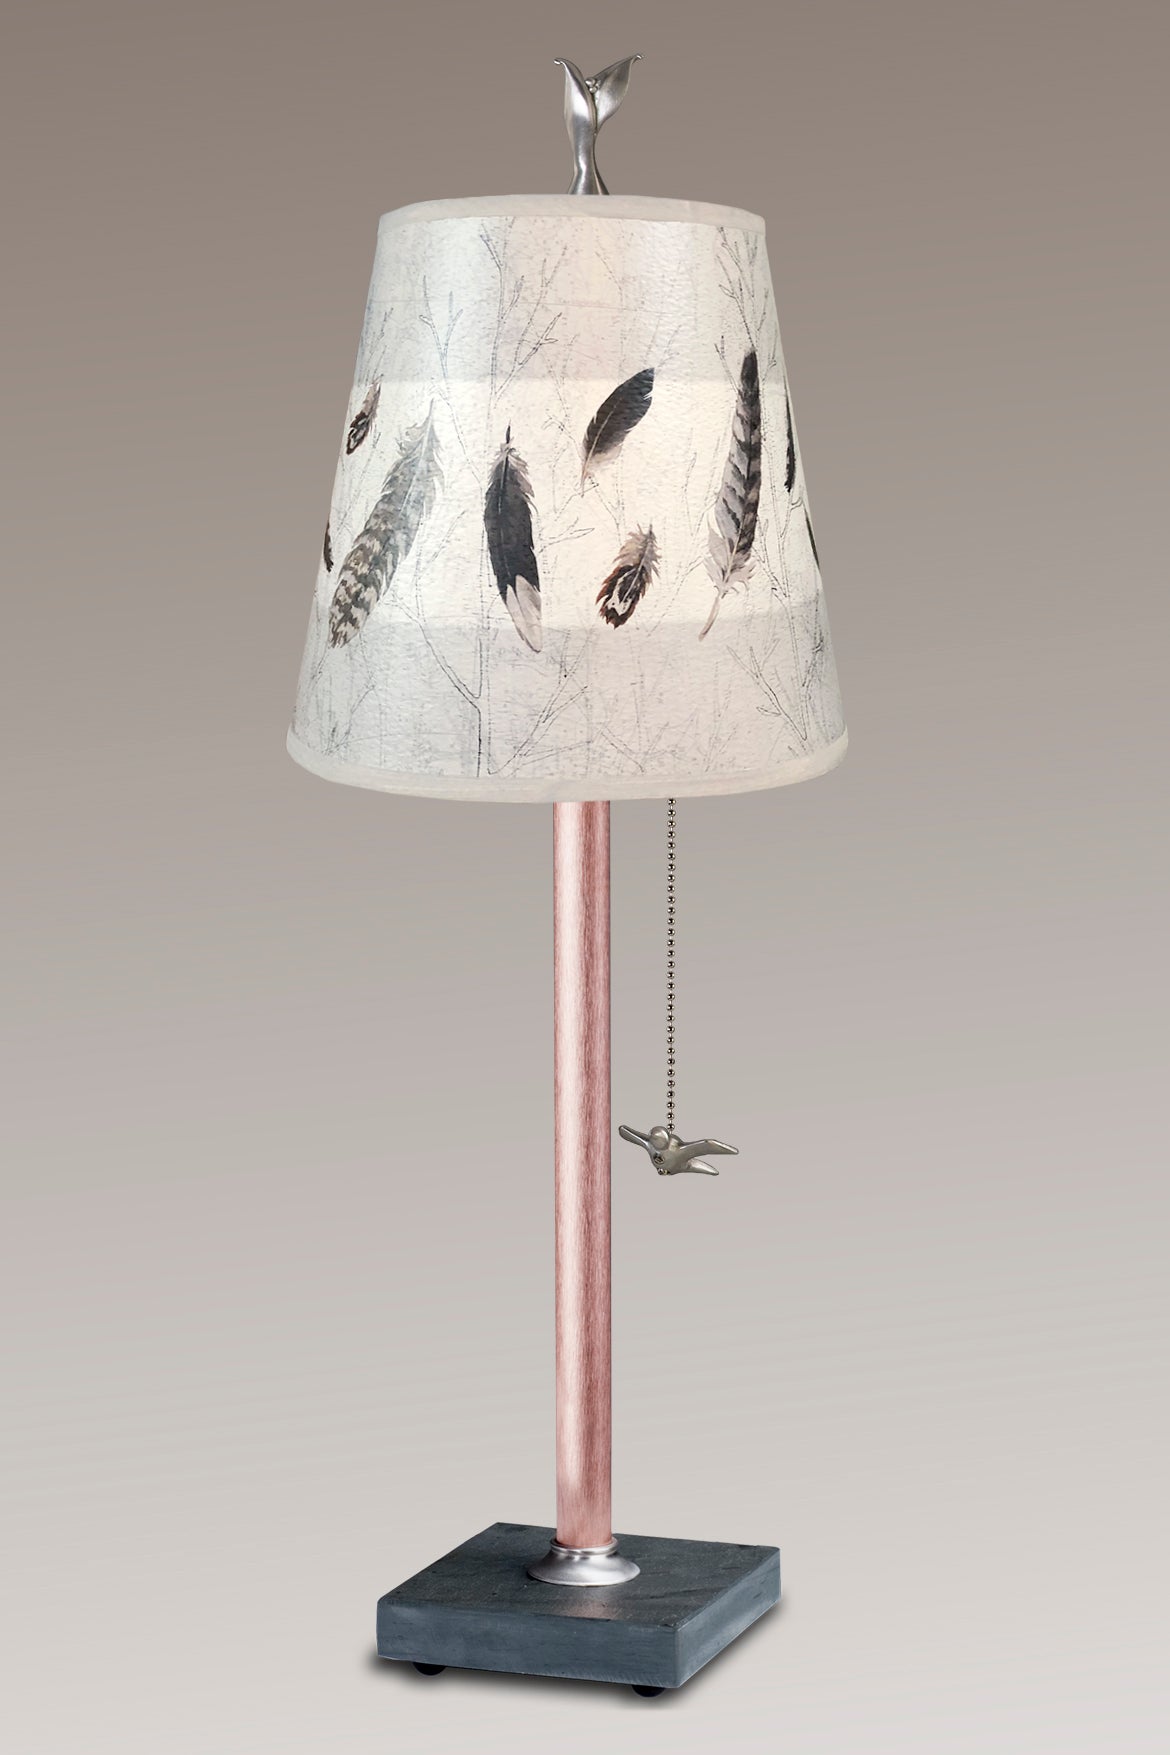 Janna Ugone & Co Table Lamps Copper Table Lamp with Small Drum in Feathers in Pebble